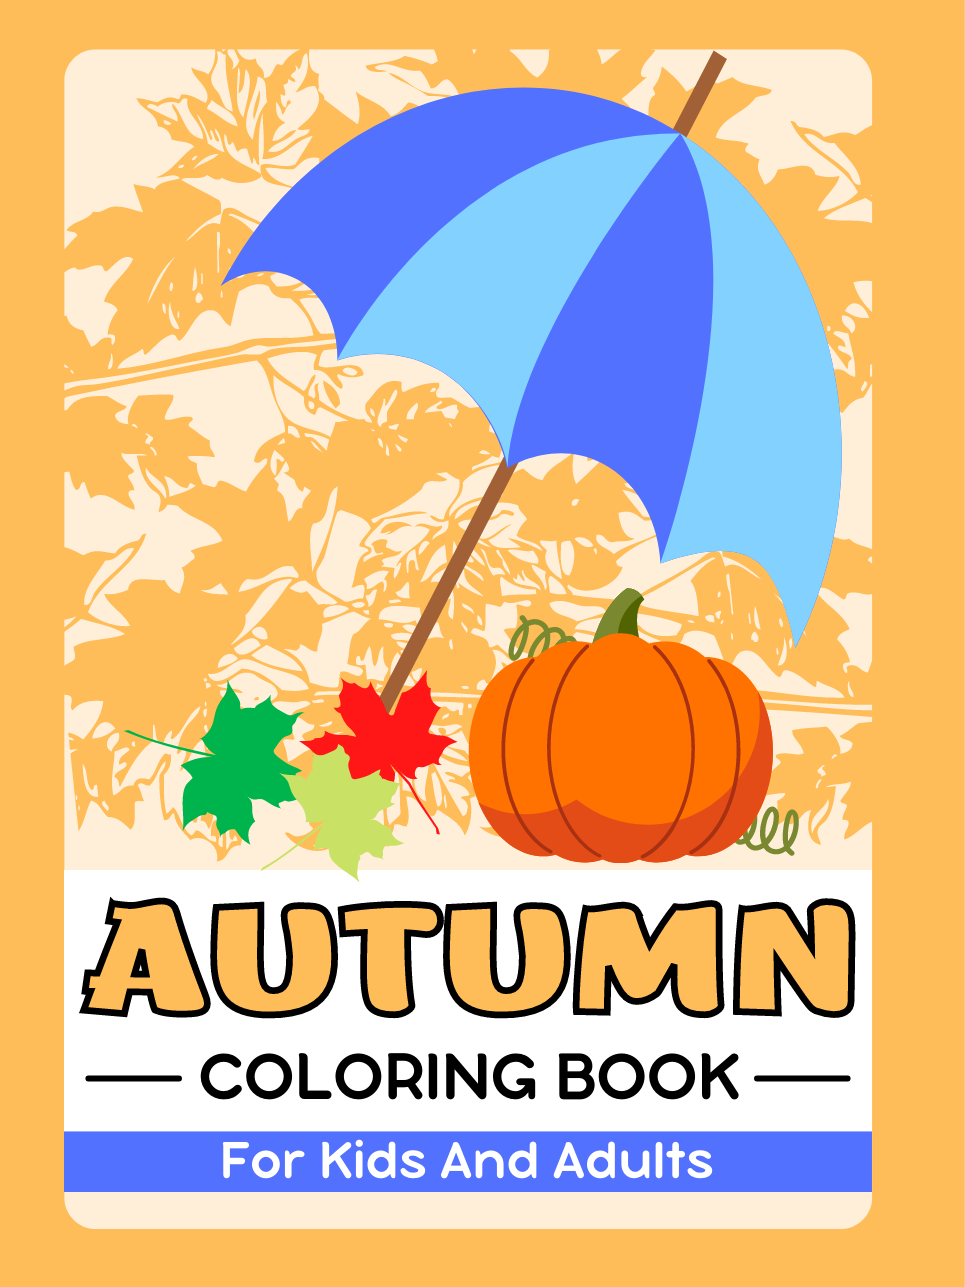 Autumn Coloring Book For Kids And Adults